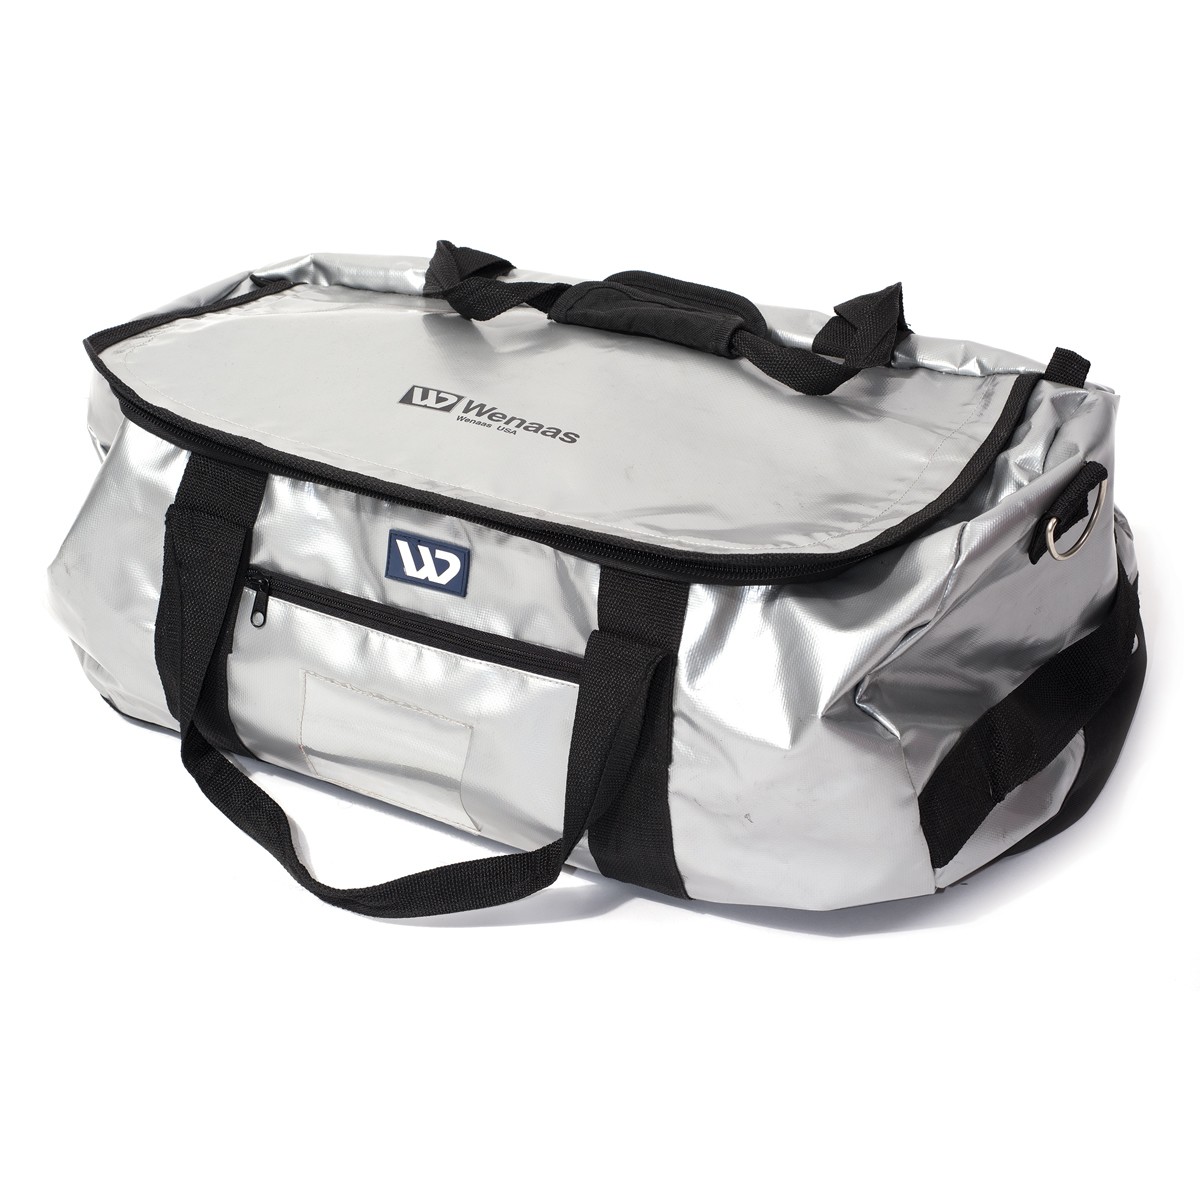 Offshore Bag - Silver